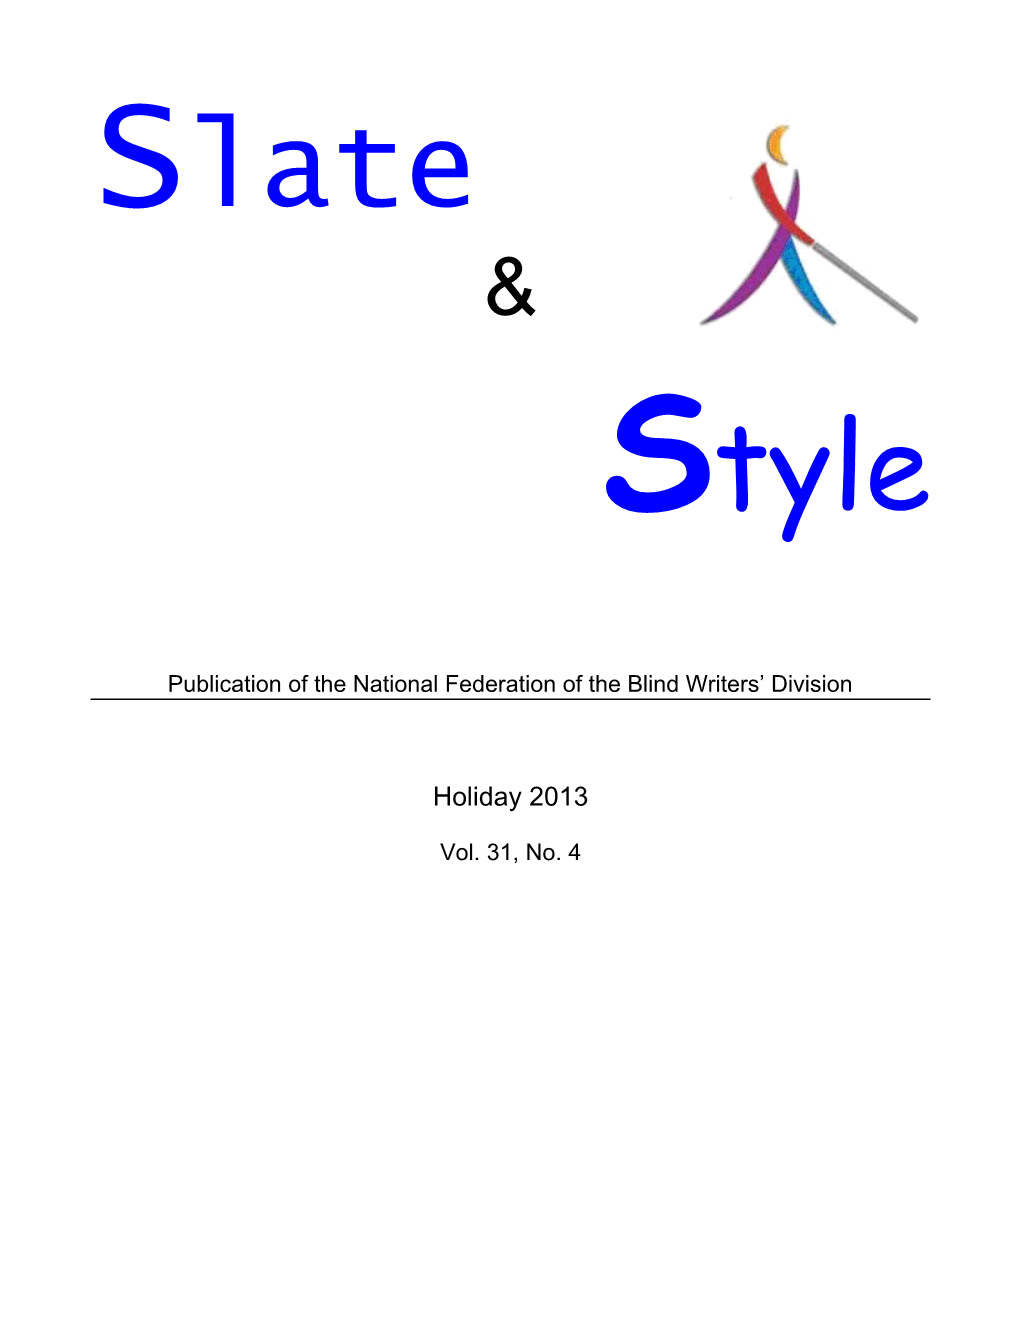 Publication of the National Federation of the Blind Writers Division